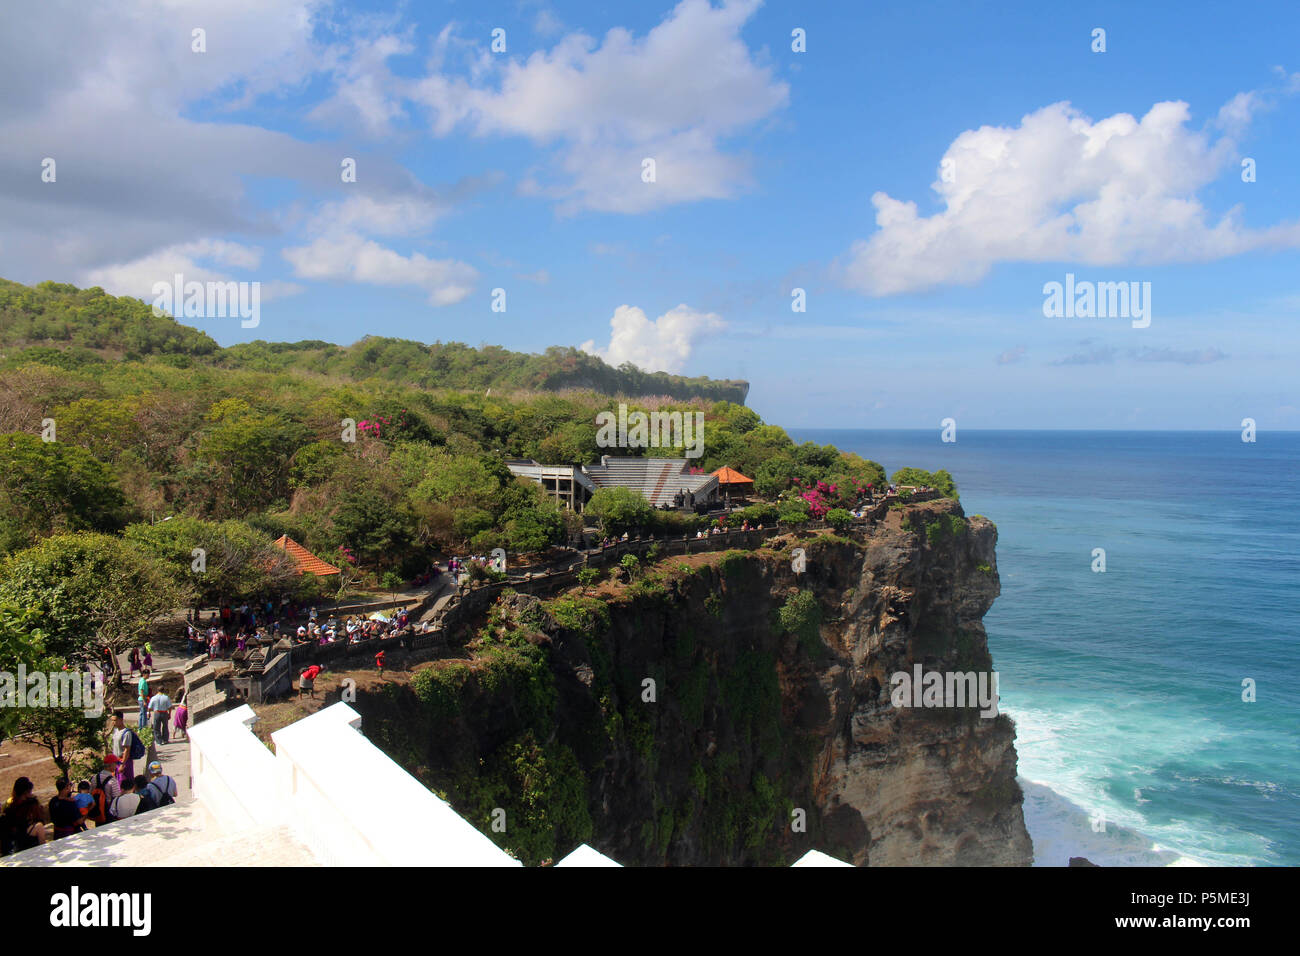 The exotic temple at the cliff, Pura Luhur Uluwatu. What a stunning view! Taken in Bali, July 2018. Stock Photo